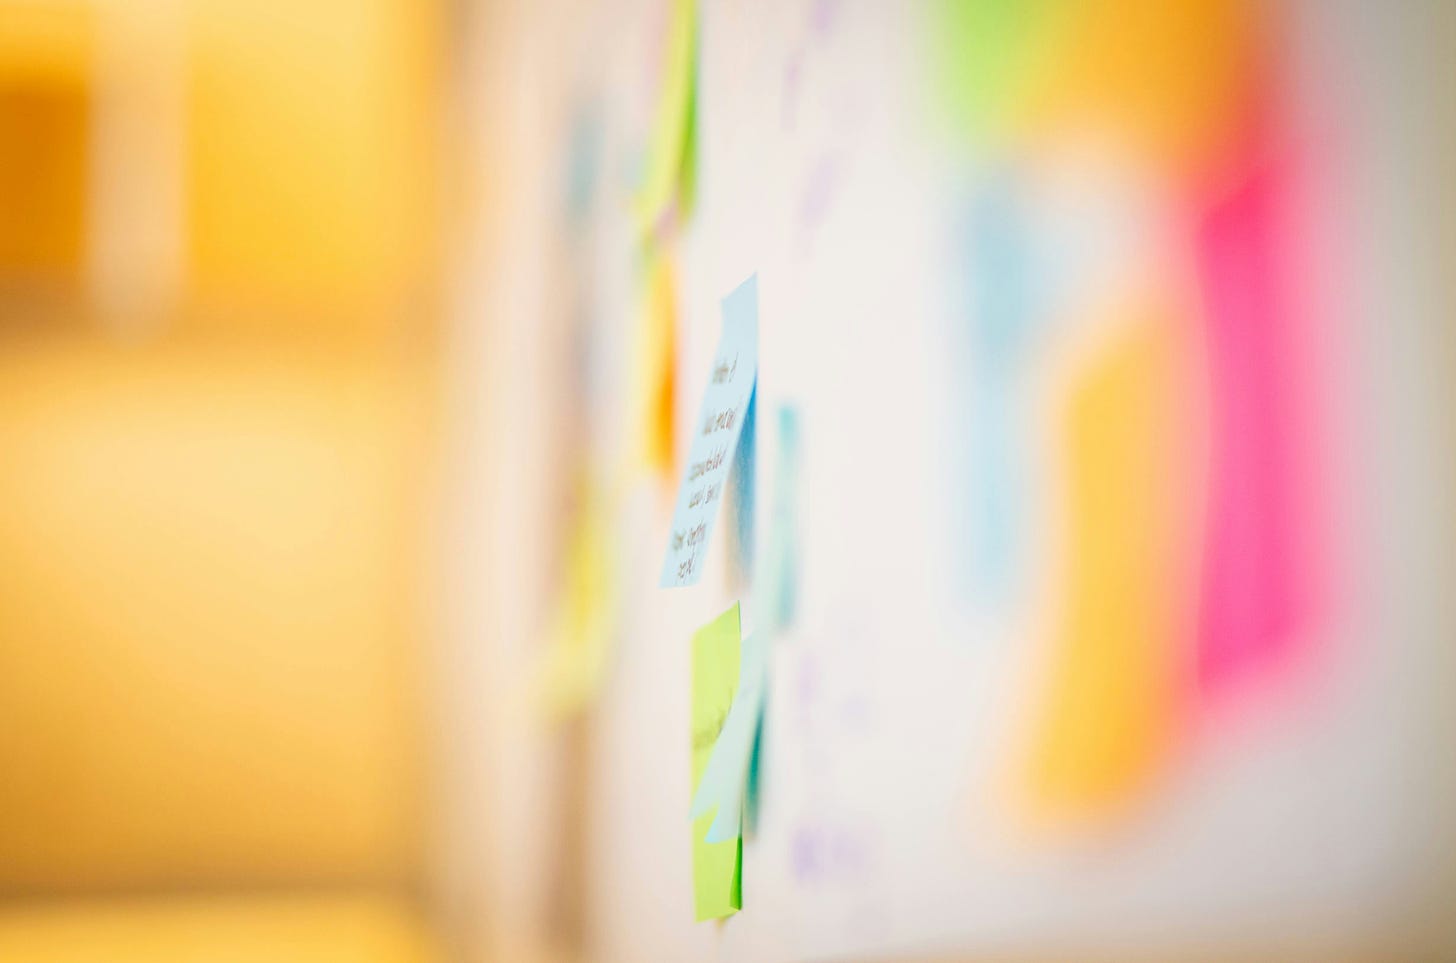 Post-it notes on a whiteboard